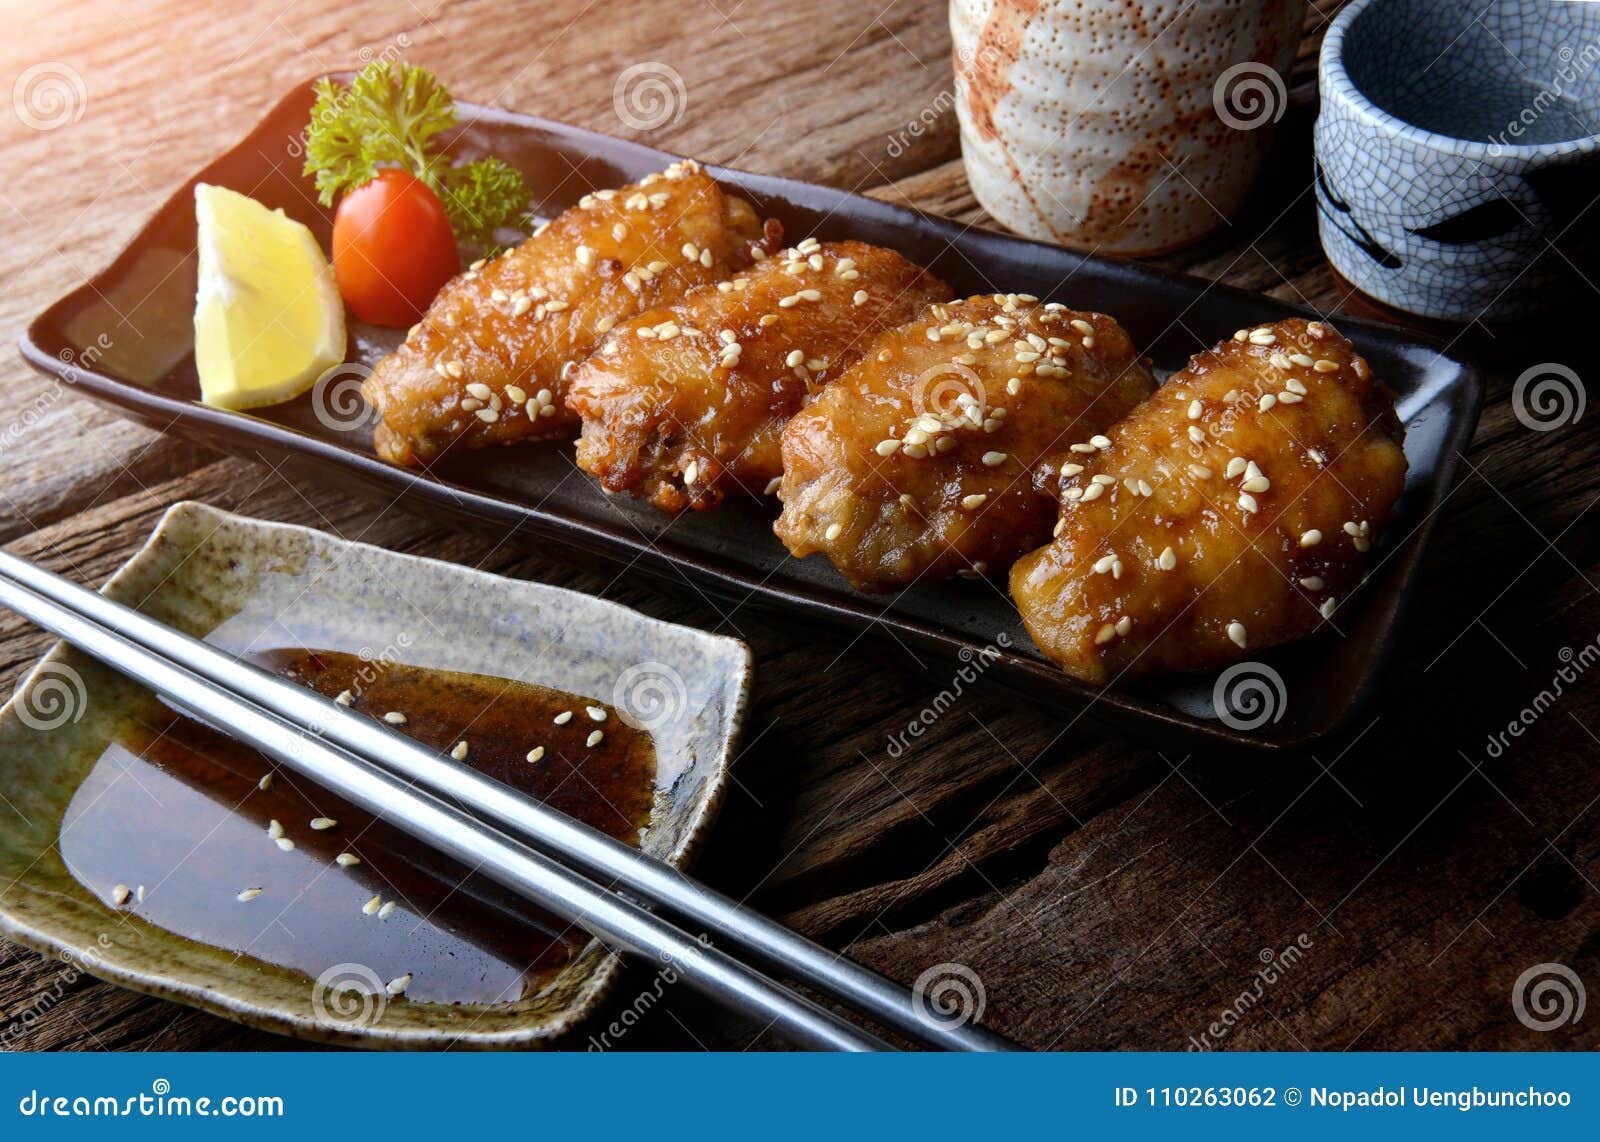 fried chicken wing with spicy sauce in japanese style.